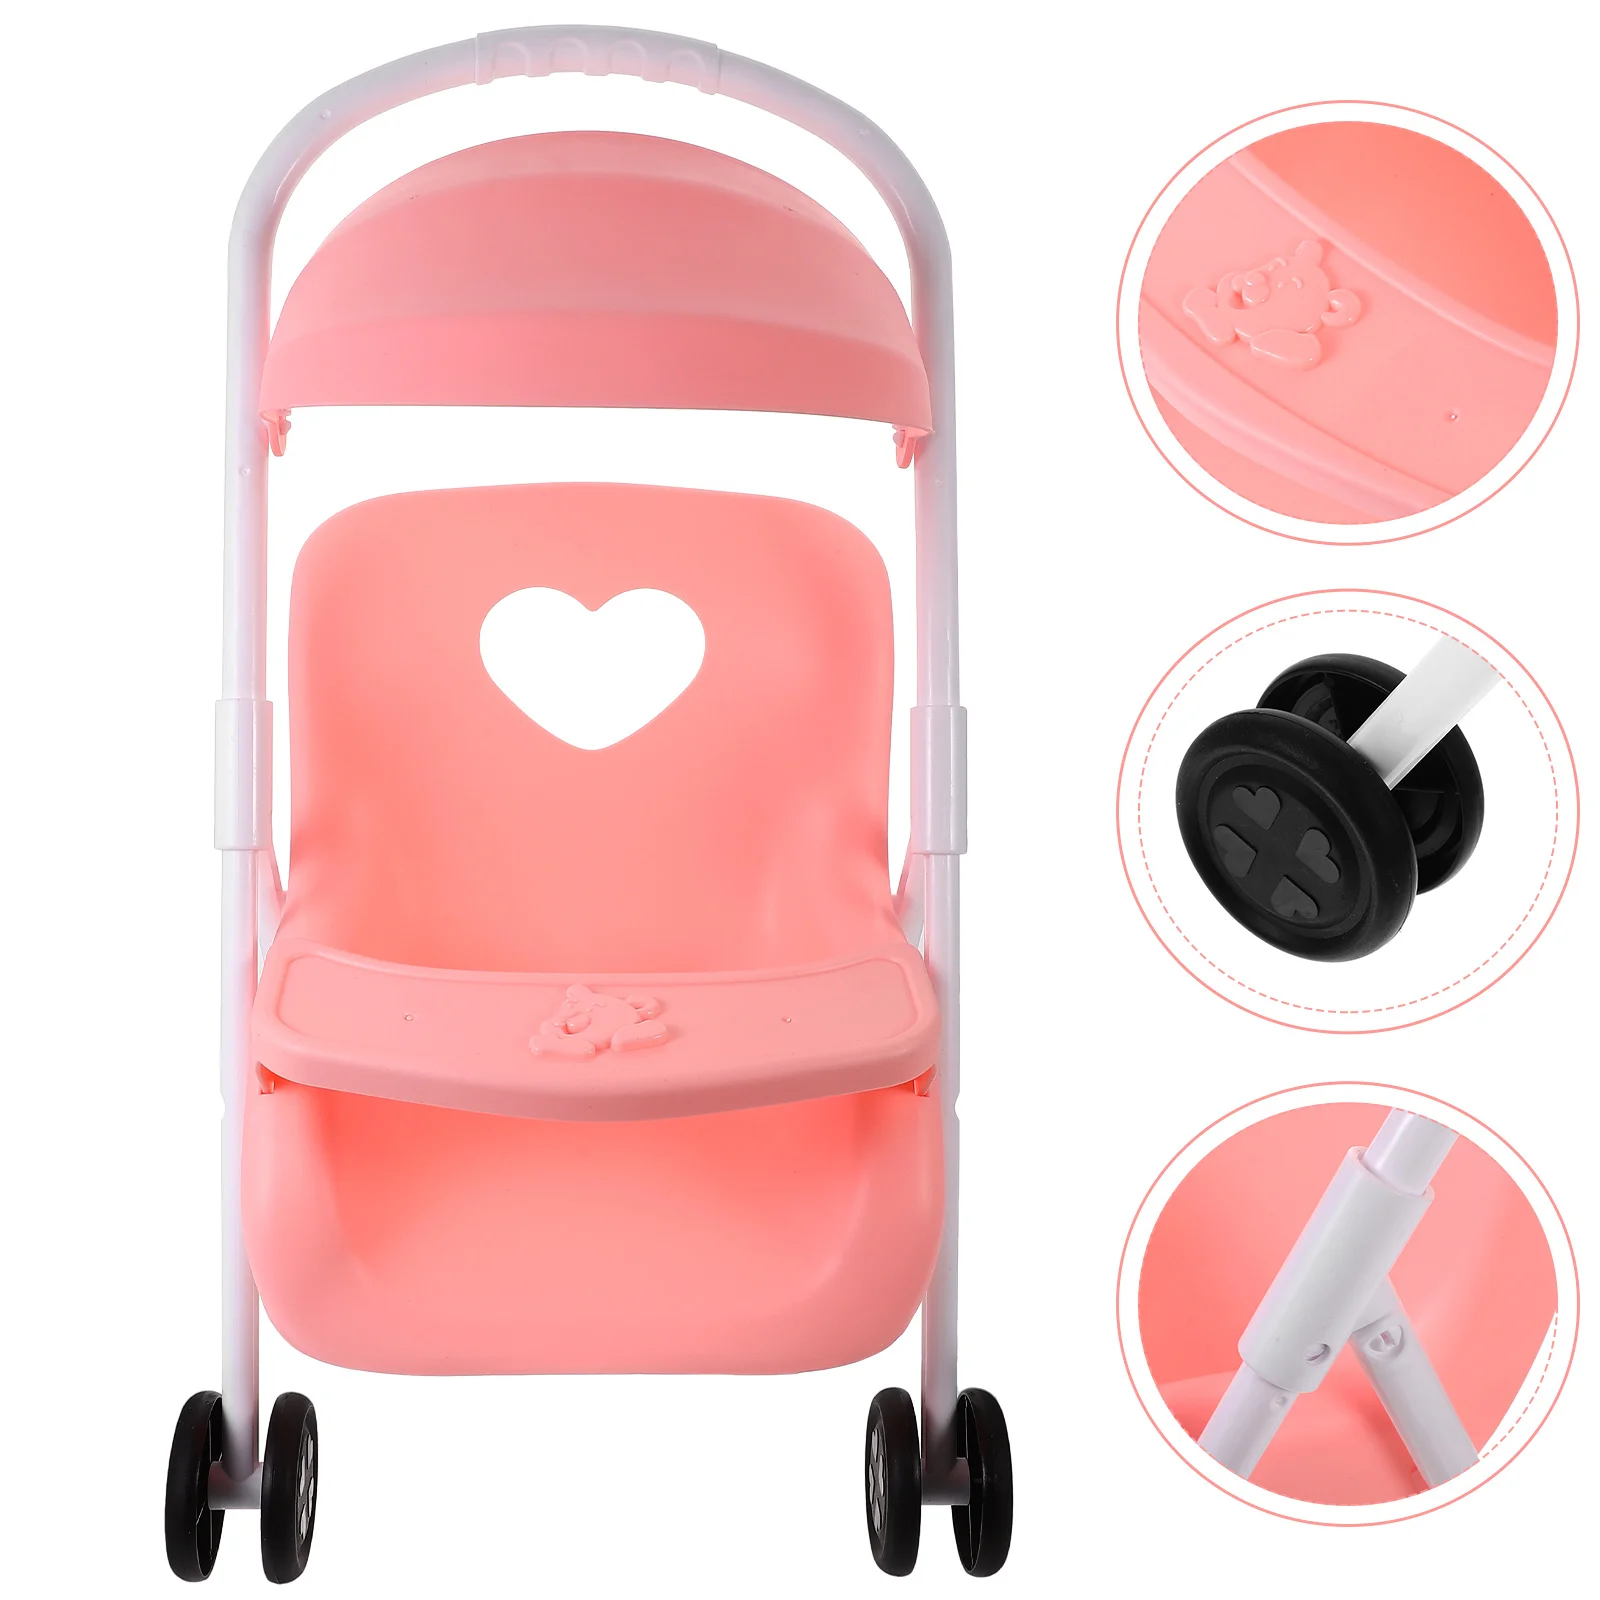 Doll Stroller Play Game Doll Stroller Simulated Play Game Stroller Furniture Adornment Children Role Playing Game for Dollhouse creative kid stroller toy stroller for dolls dress girls stroller ages 3 kids birth xma gift doll toy accessories girls toy